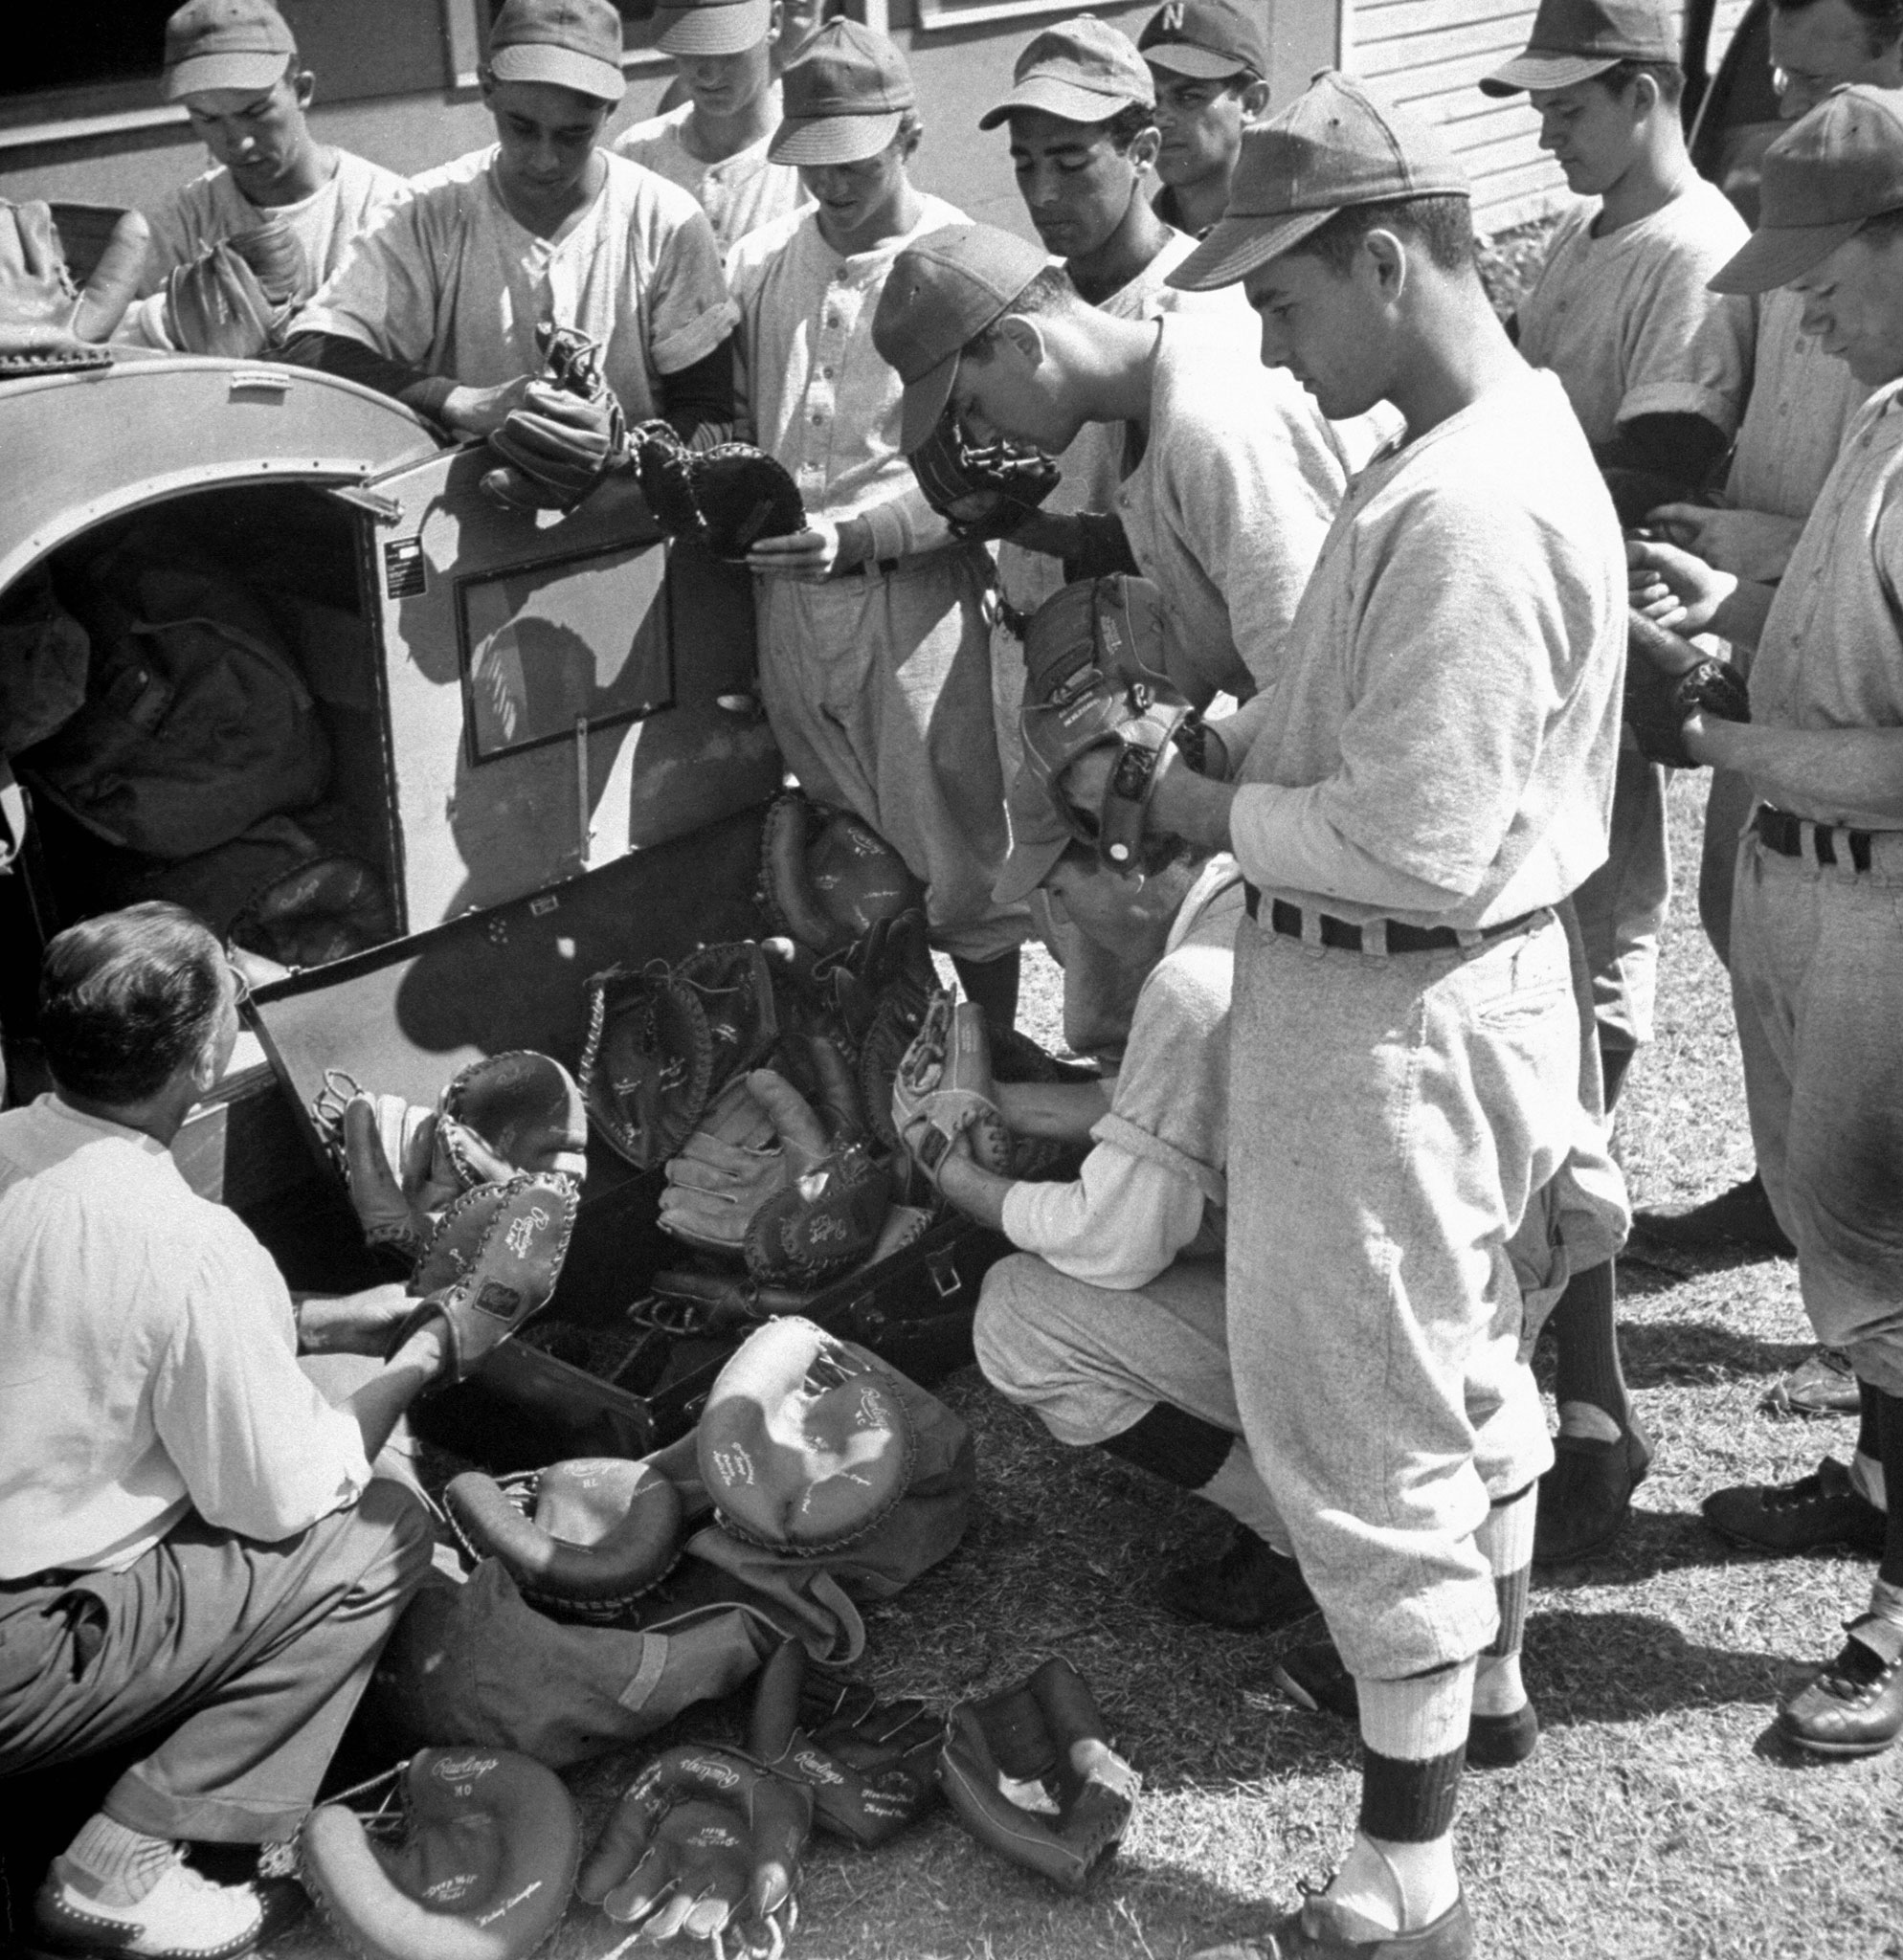 Players buy their own baseball mitts during spring training, Dodgertown, Vero Beach, Fla., 1948.